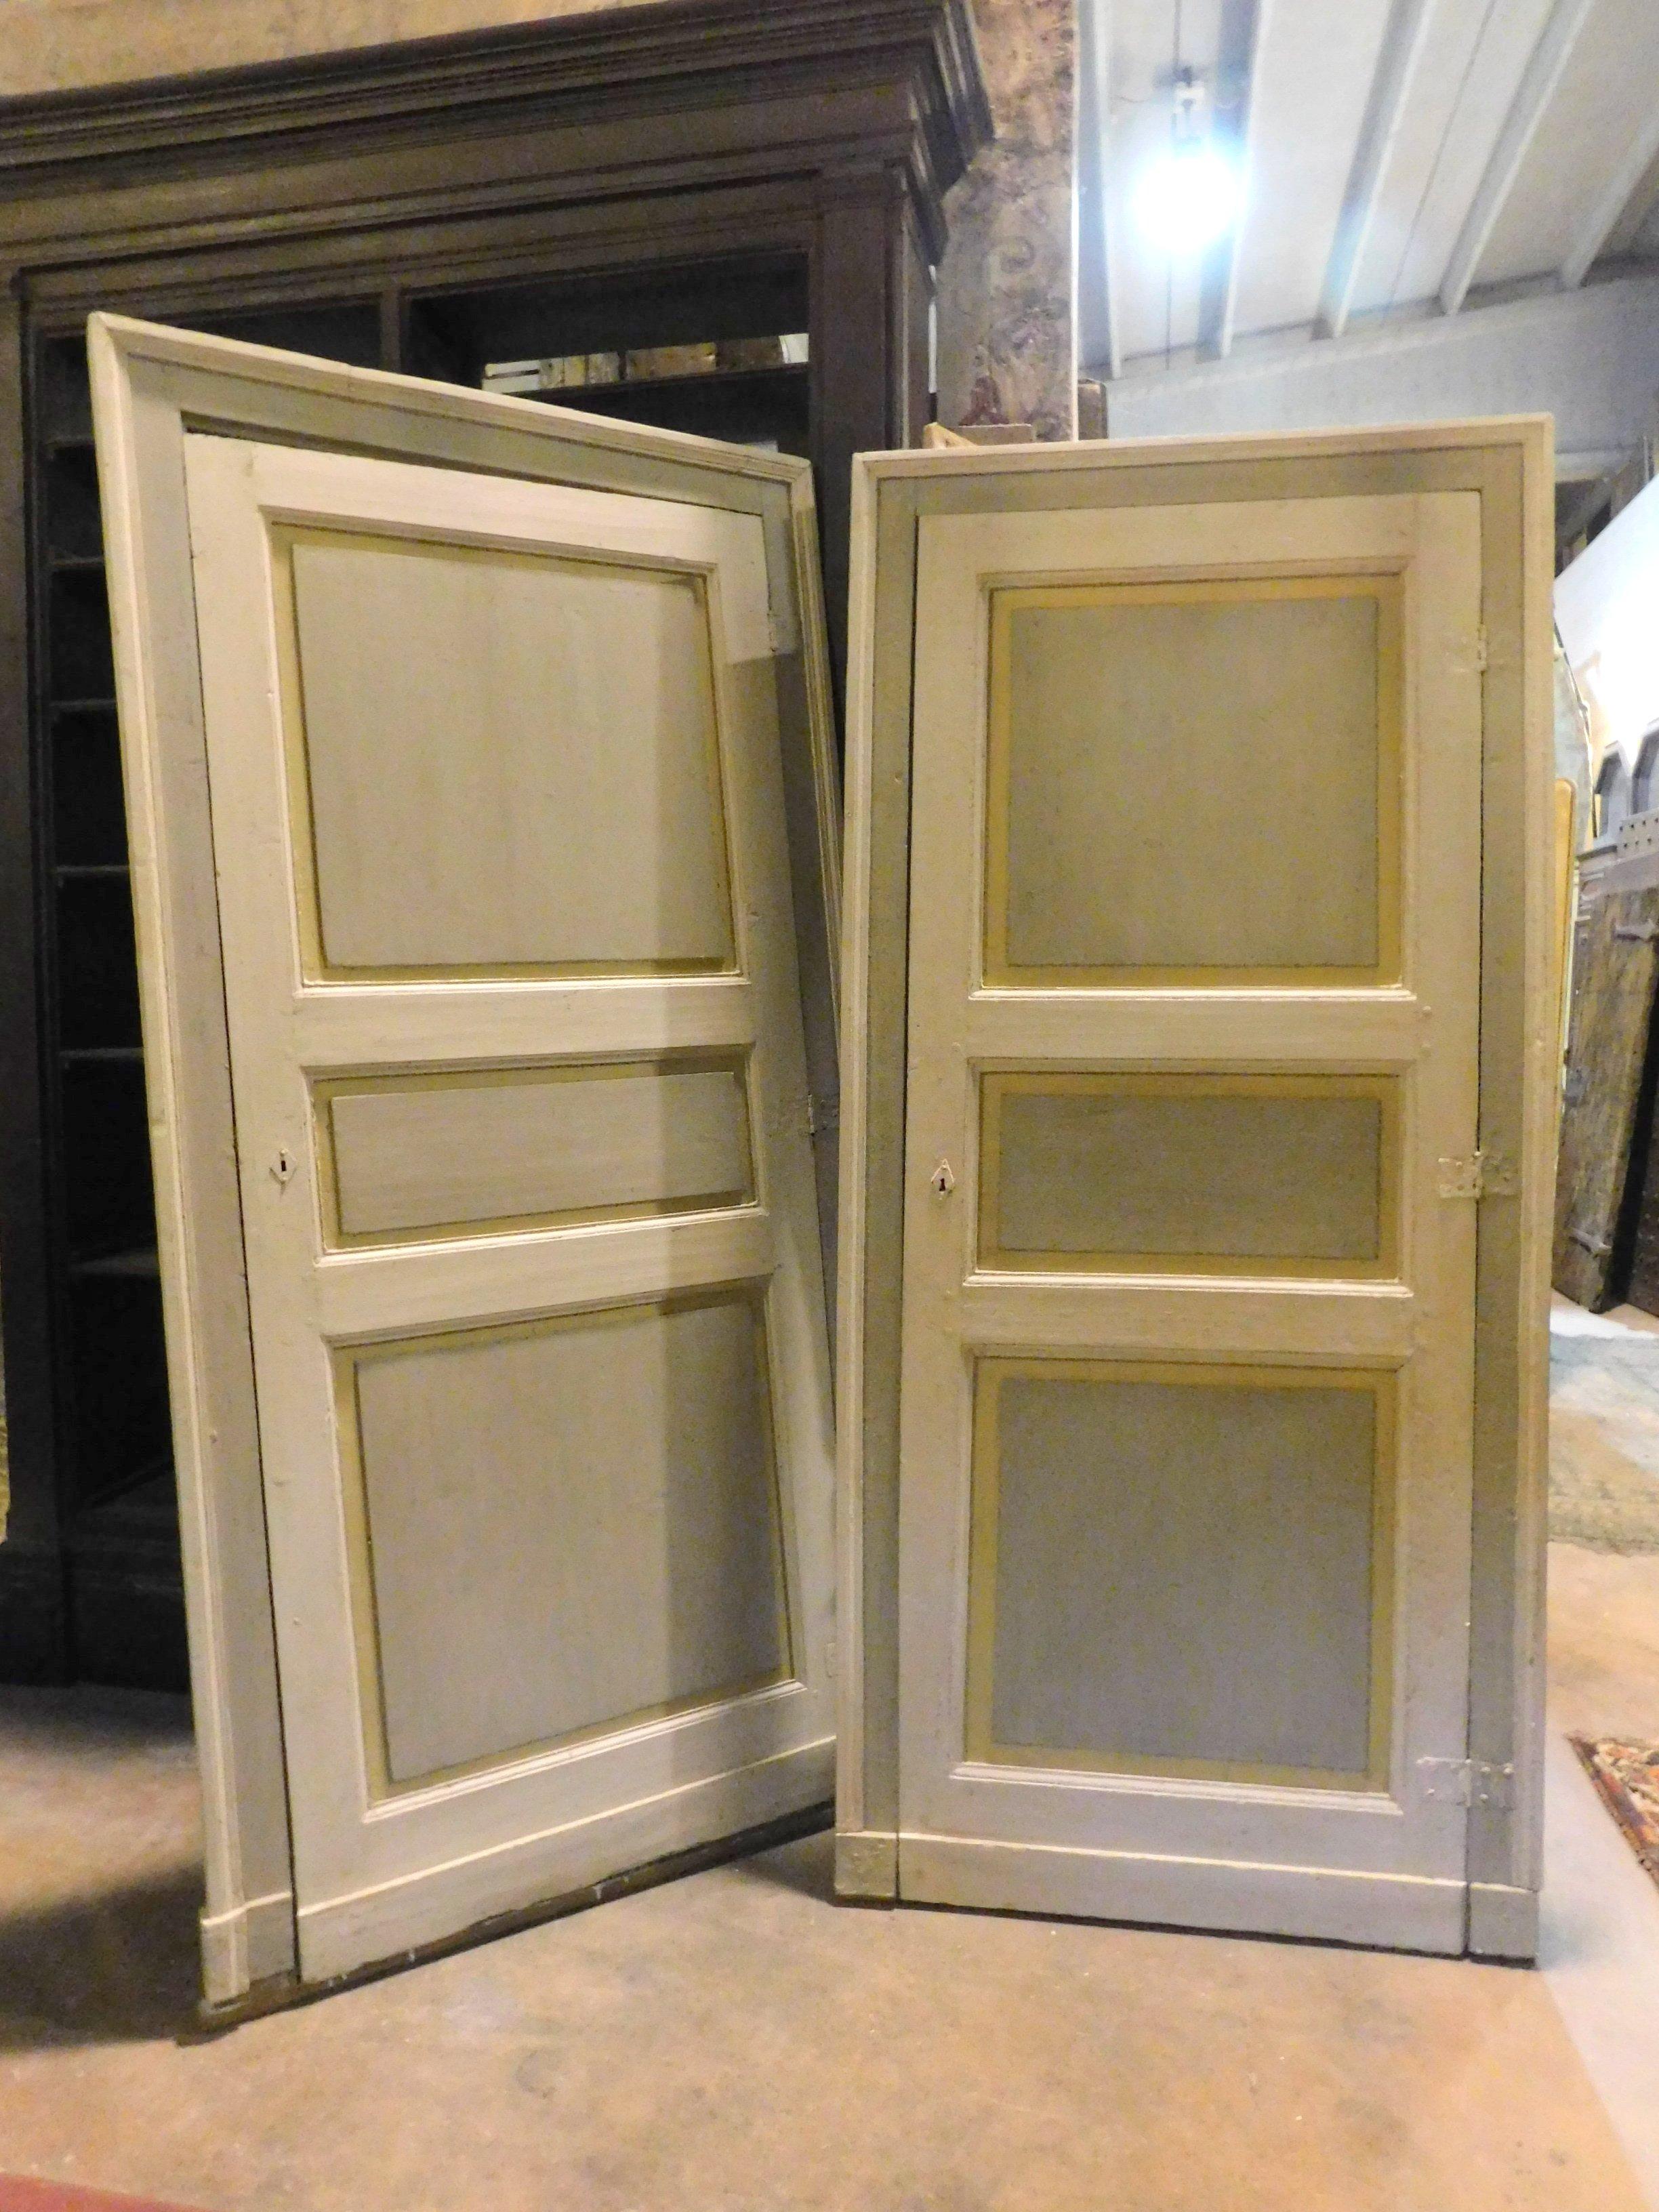 Antique pair of lacquered doors, each with 3 panels carved and lacquered with true colors, gray, beige, complete with original frame, built and installed in the same 19th century school in Italy.
Origin Piedmont, beautiful in pairs, in their